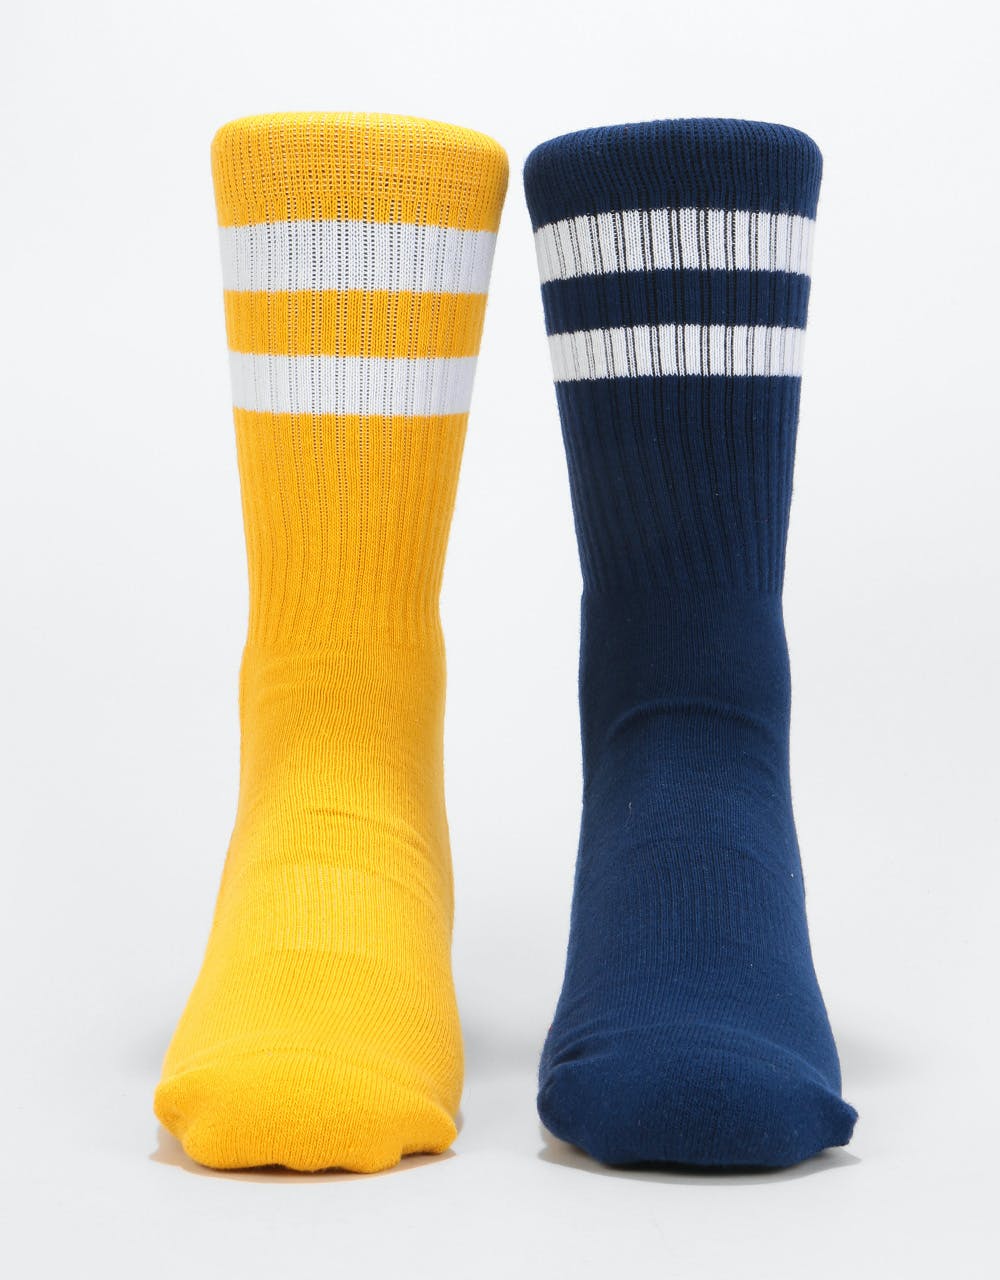 Route One Classic Crew Socks 2 Pack - Mustard/Navy